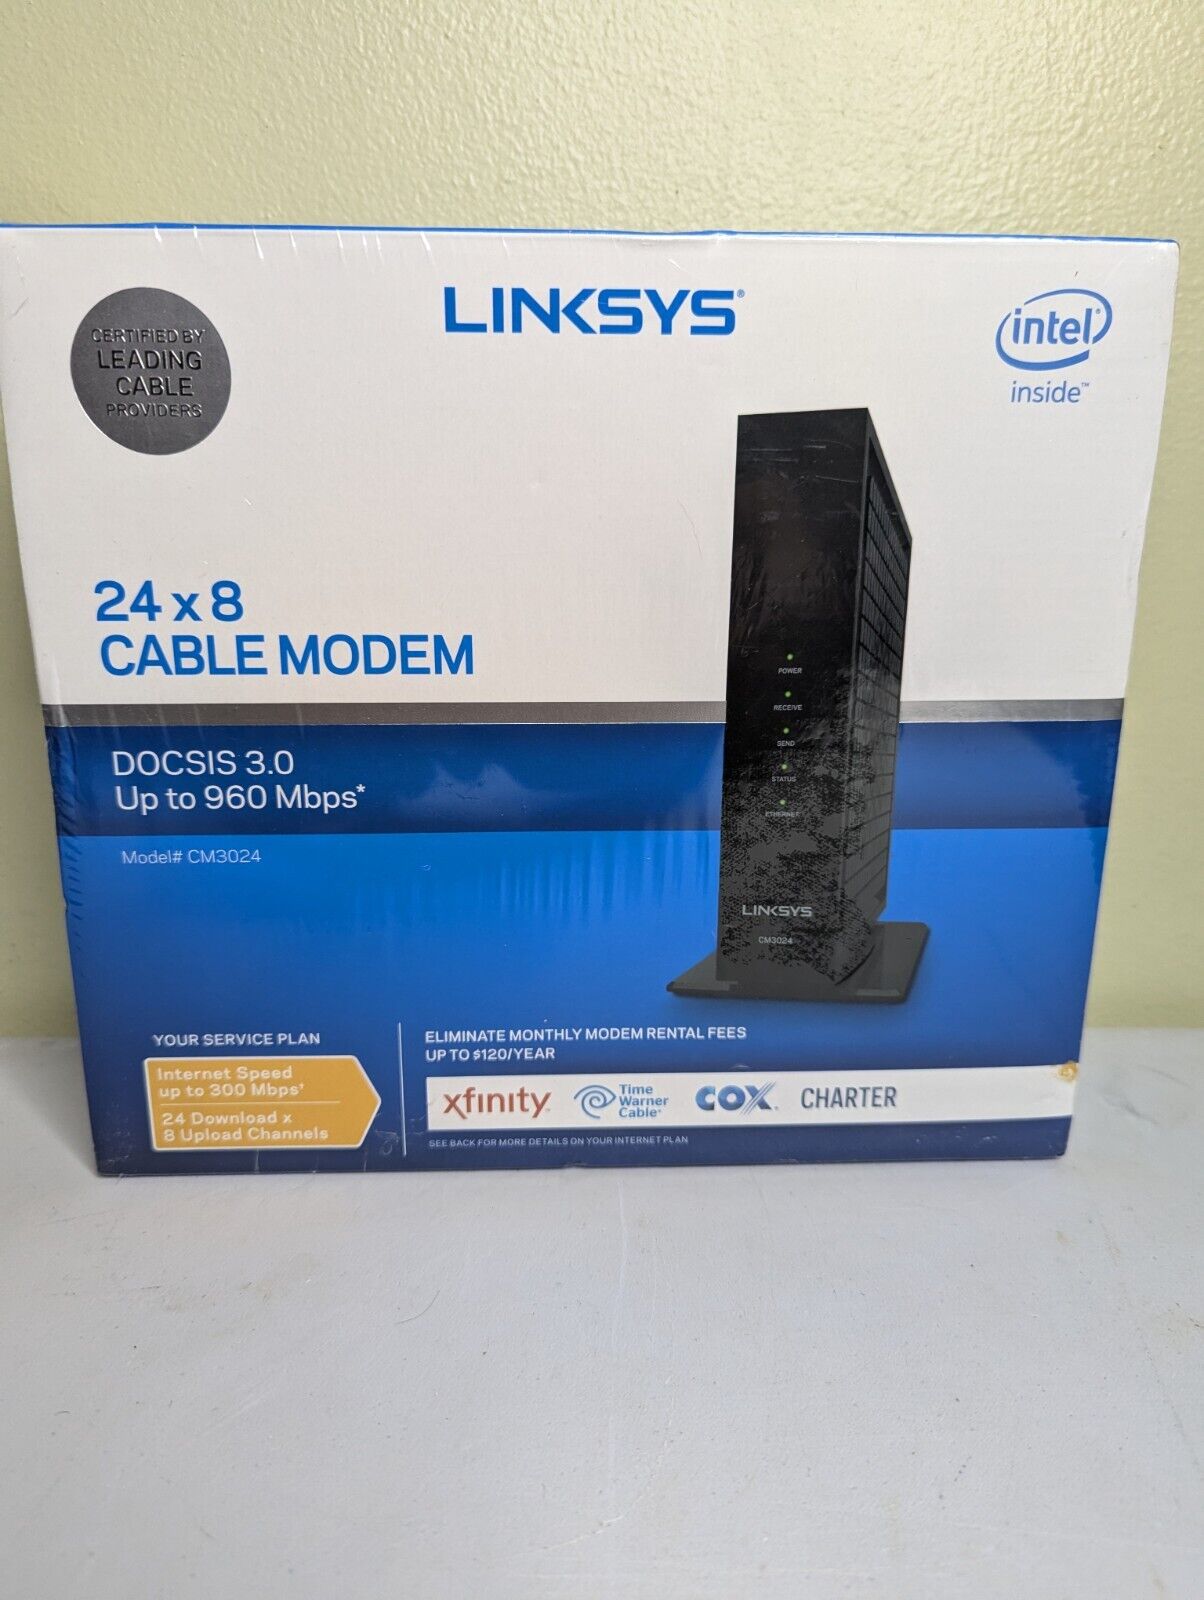 Linksys DOCSIS 3.0 24x8 Cable Modem CM3024 with Coax Cable New In Box